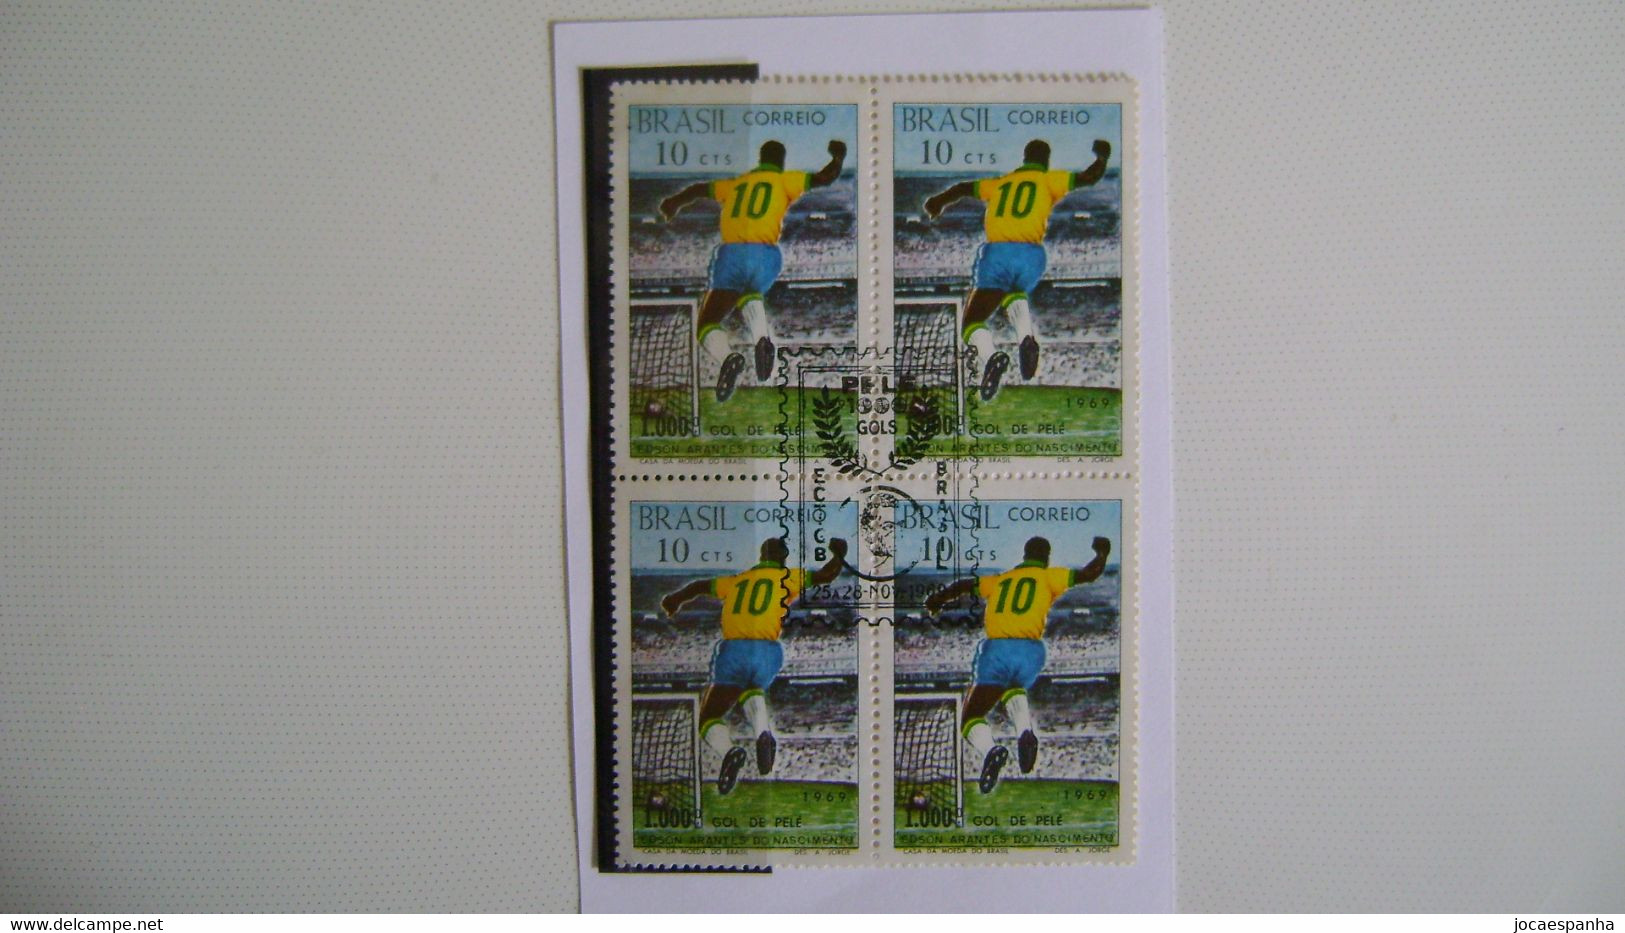 BRAZIL / BRASIL - STAMP ON COURT OF THE 1000th GOL OF THE PELE KING WITH COMMEMORATIVE STAMP IN 1969 - Oblitérés